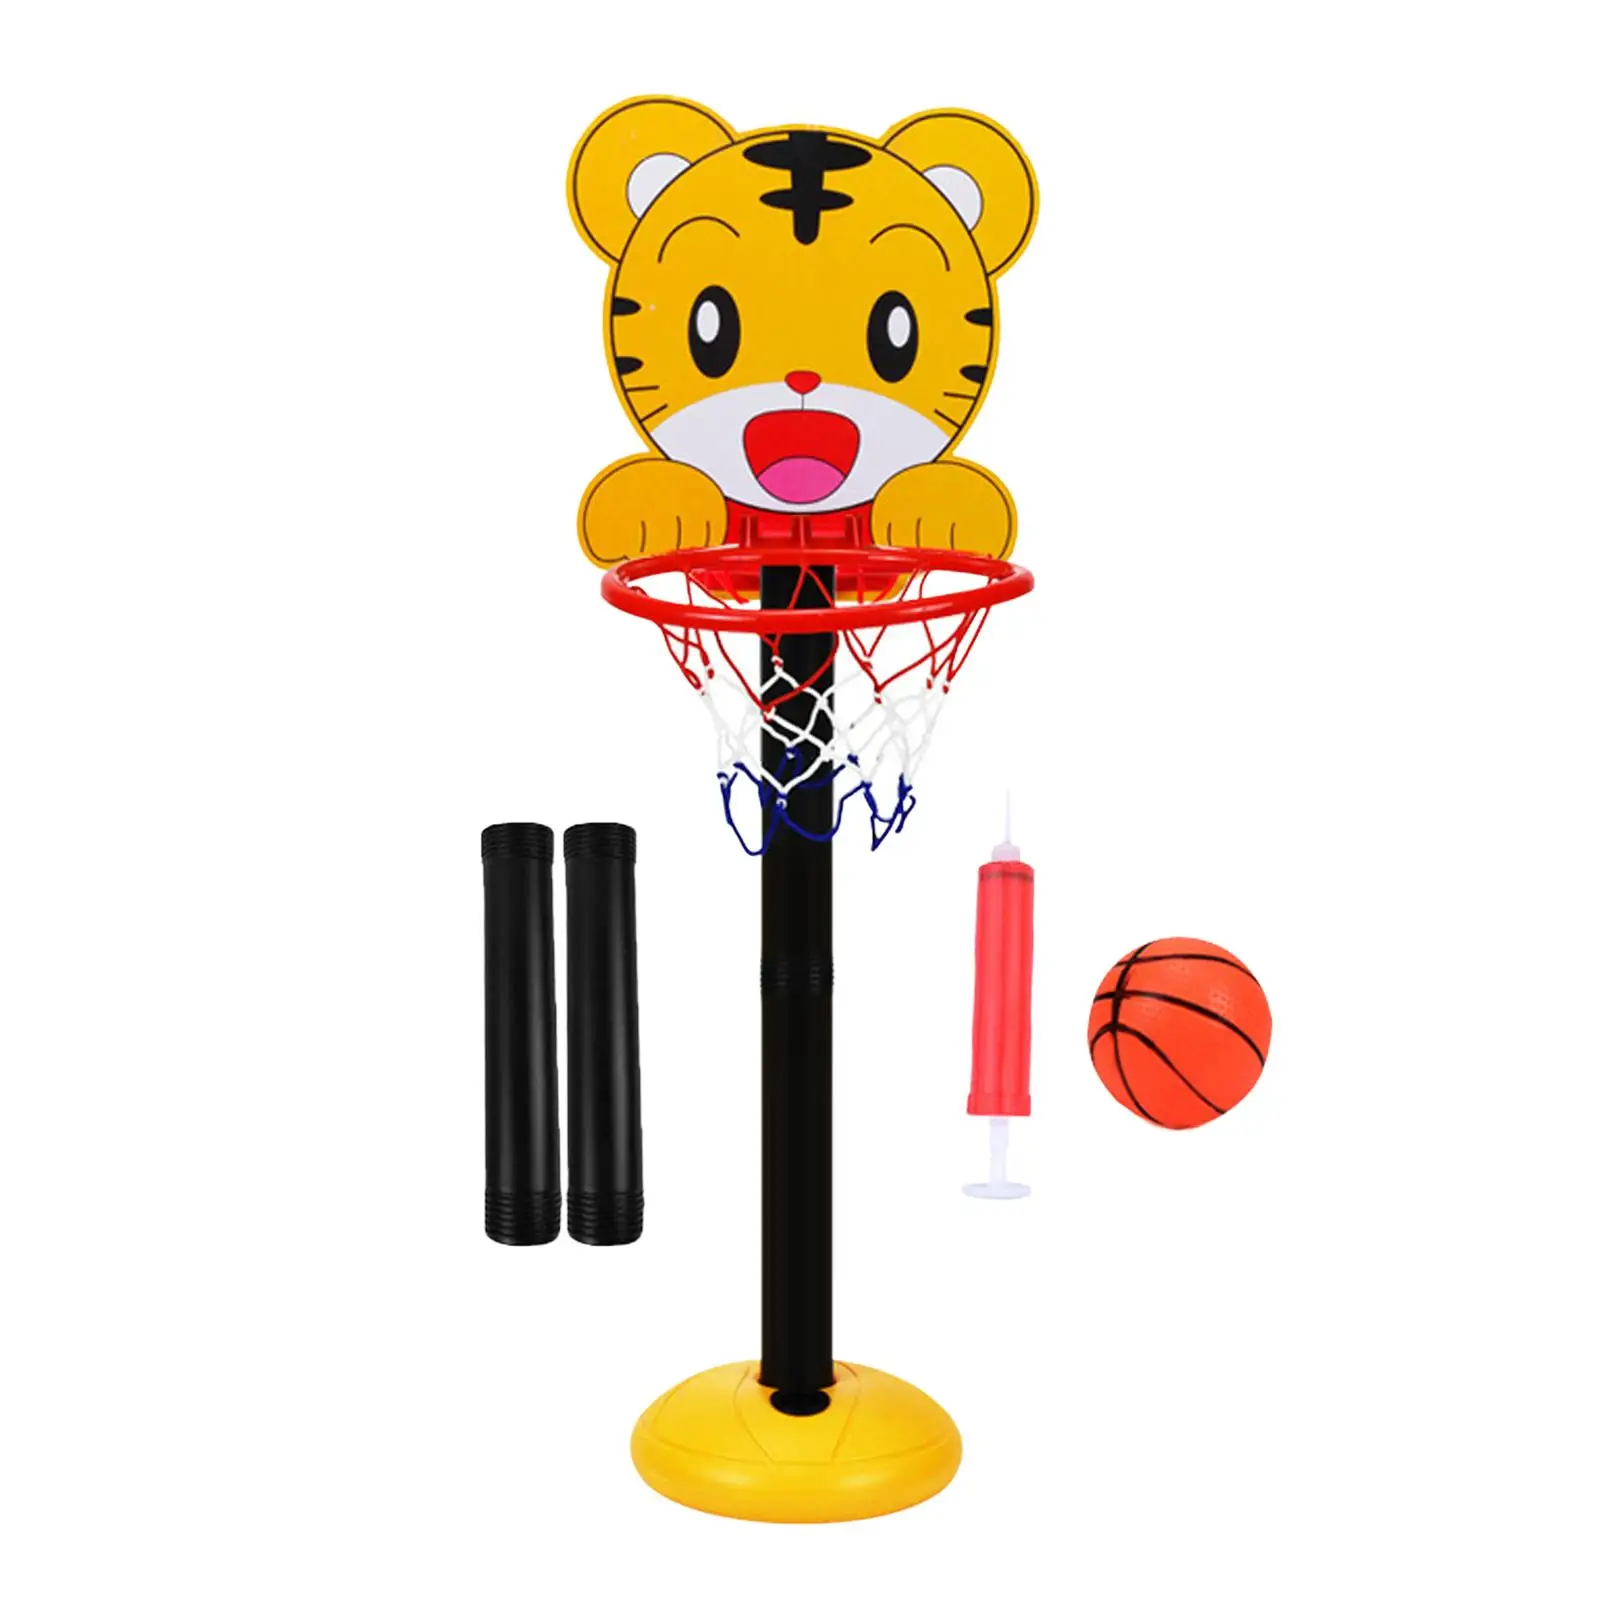 Creative Basketball Hoop Stand Kit Adjustable Height Animals Game with Net Board Sport for Kids Toddler Outside